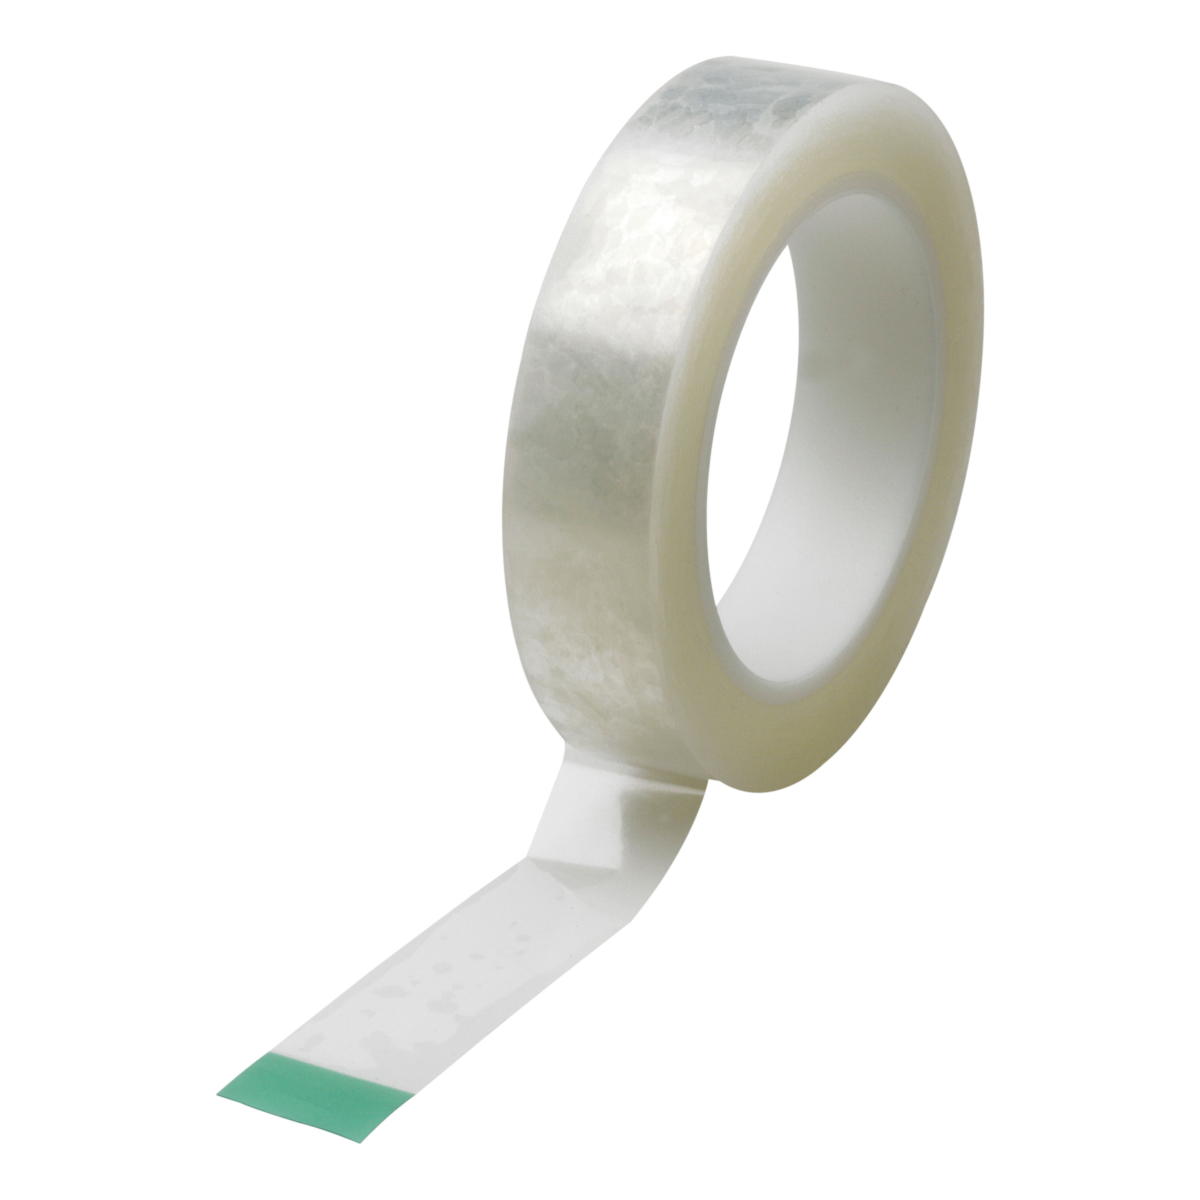 2 x 3 3M™ VHB™ Tape Replacement Adhesive Pads - SAFE-T